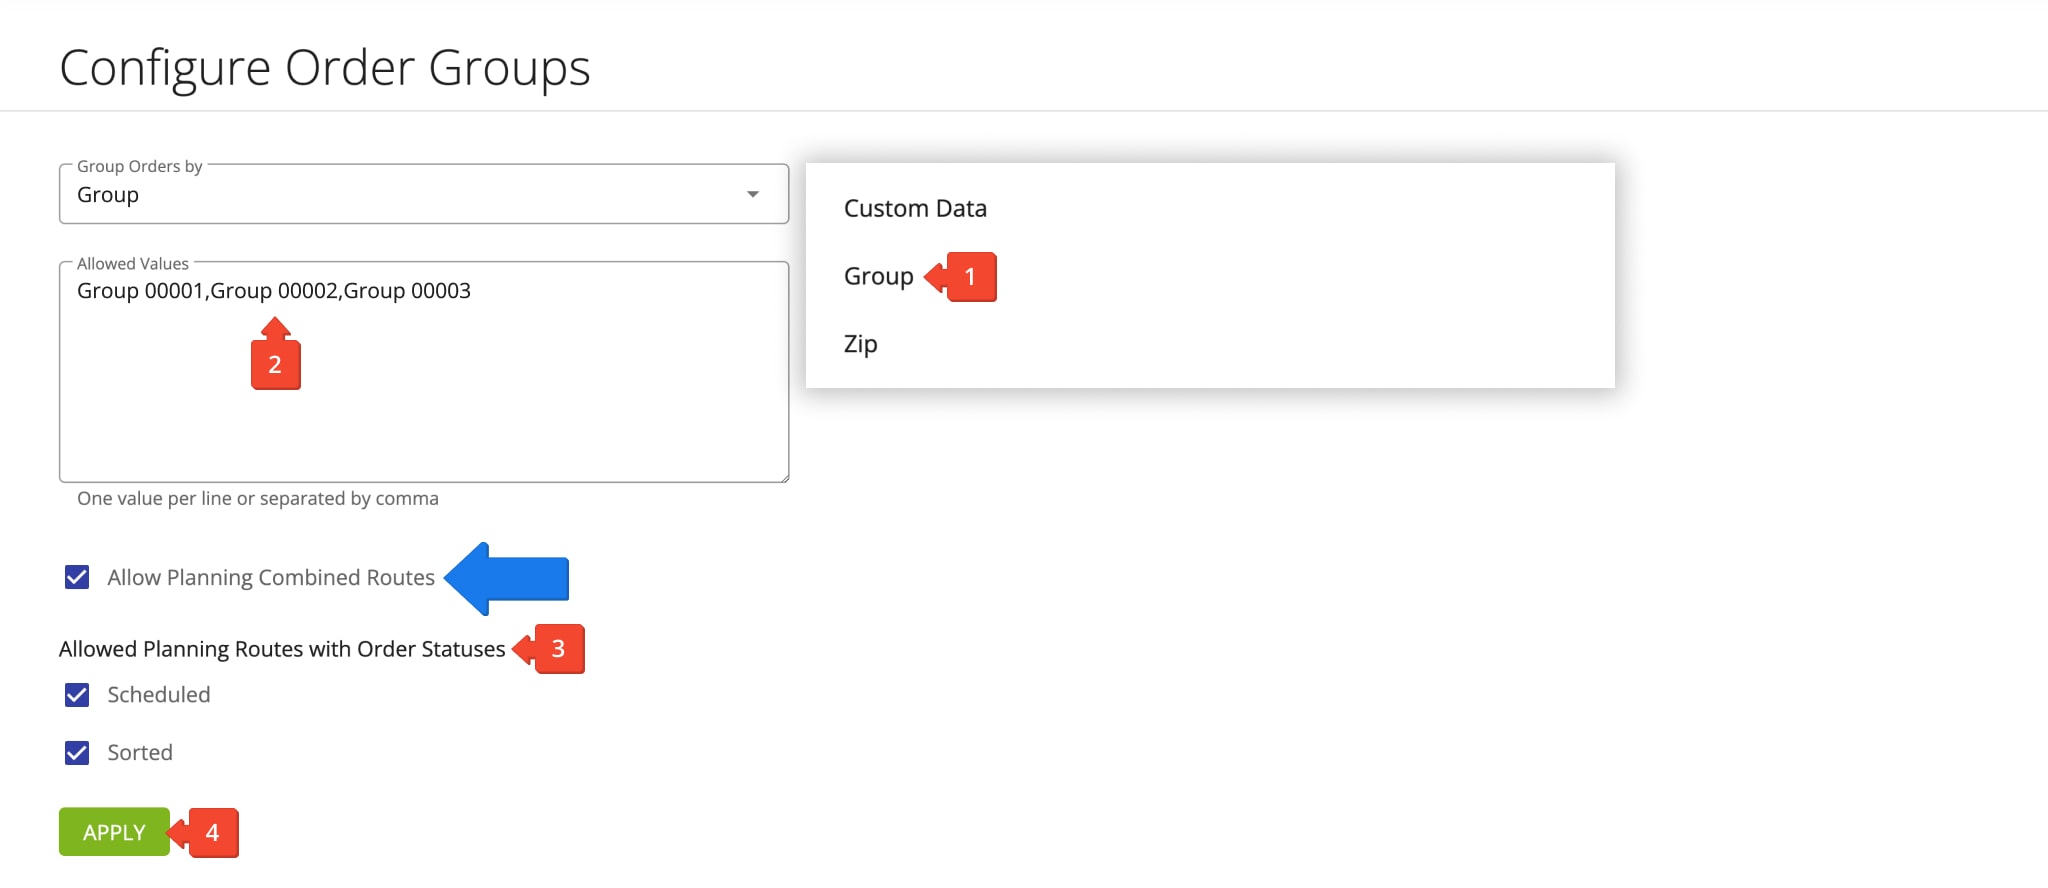 Group orders by unique Order Group IDs to create custom Order Groups for repeat routing.